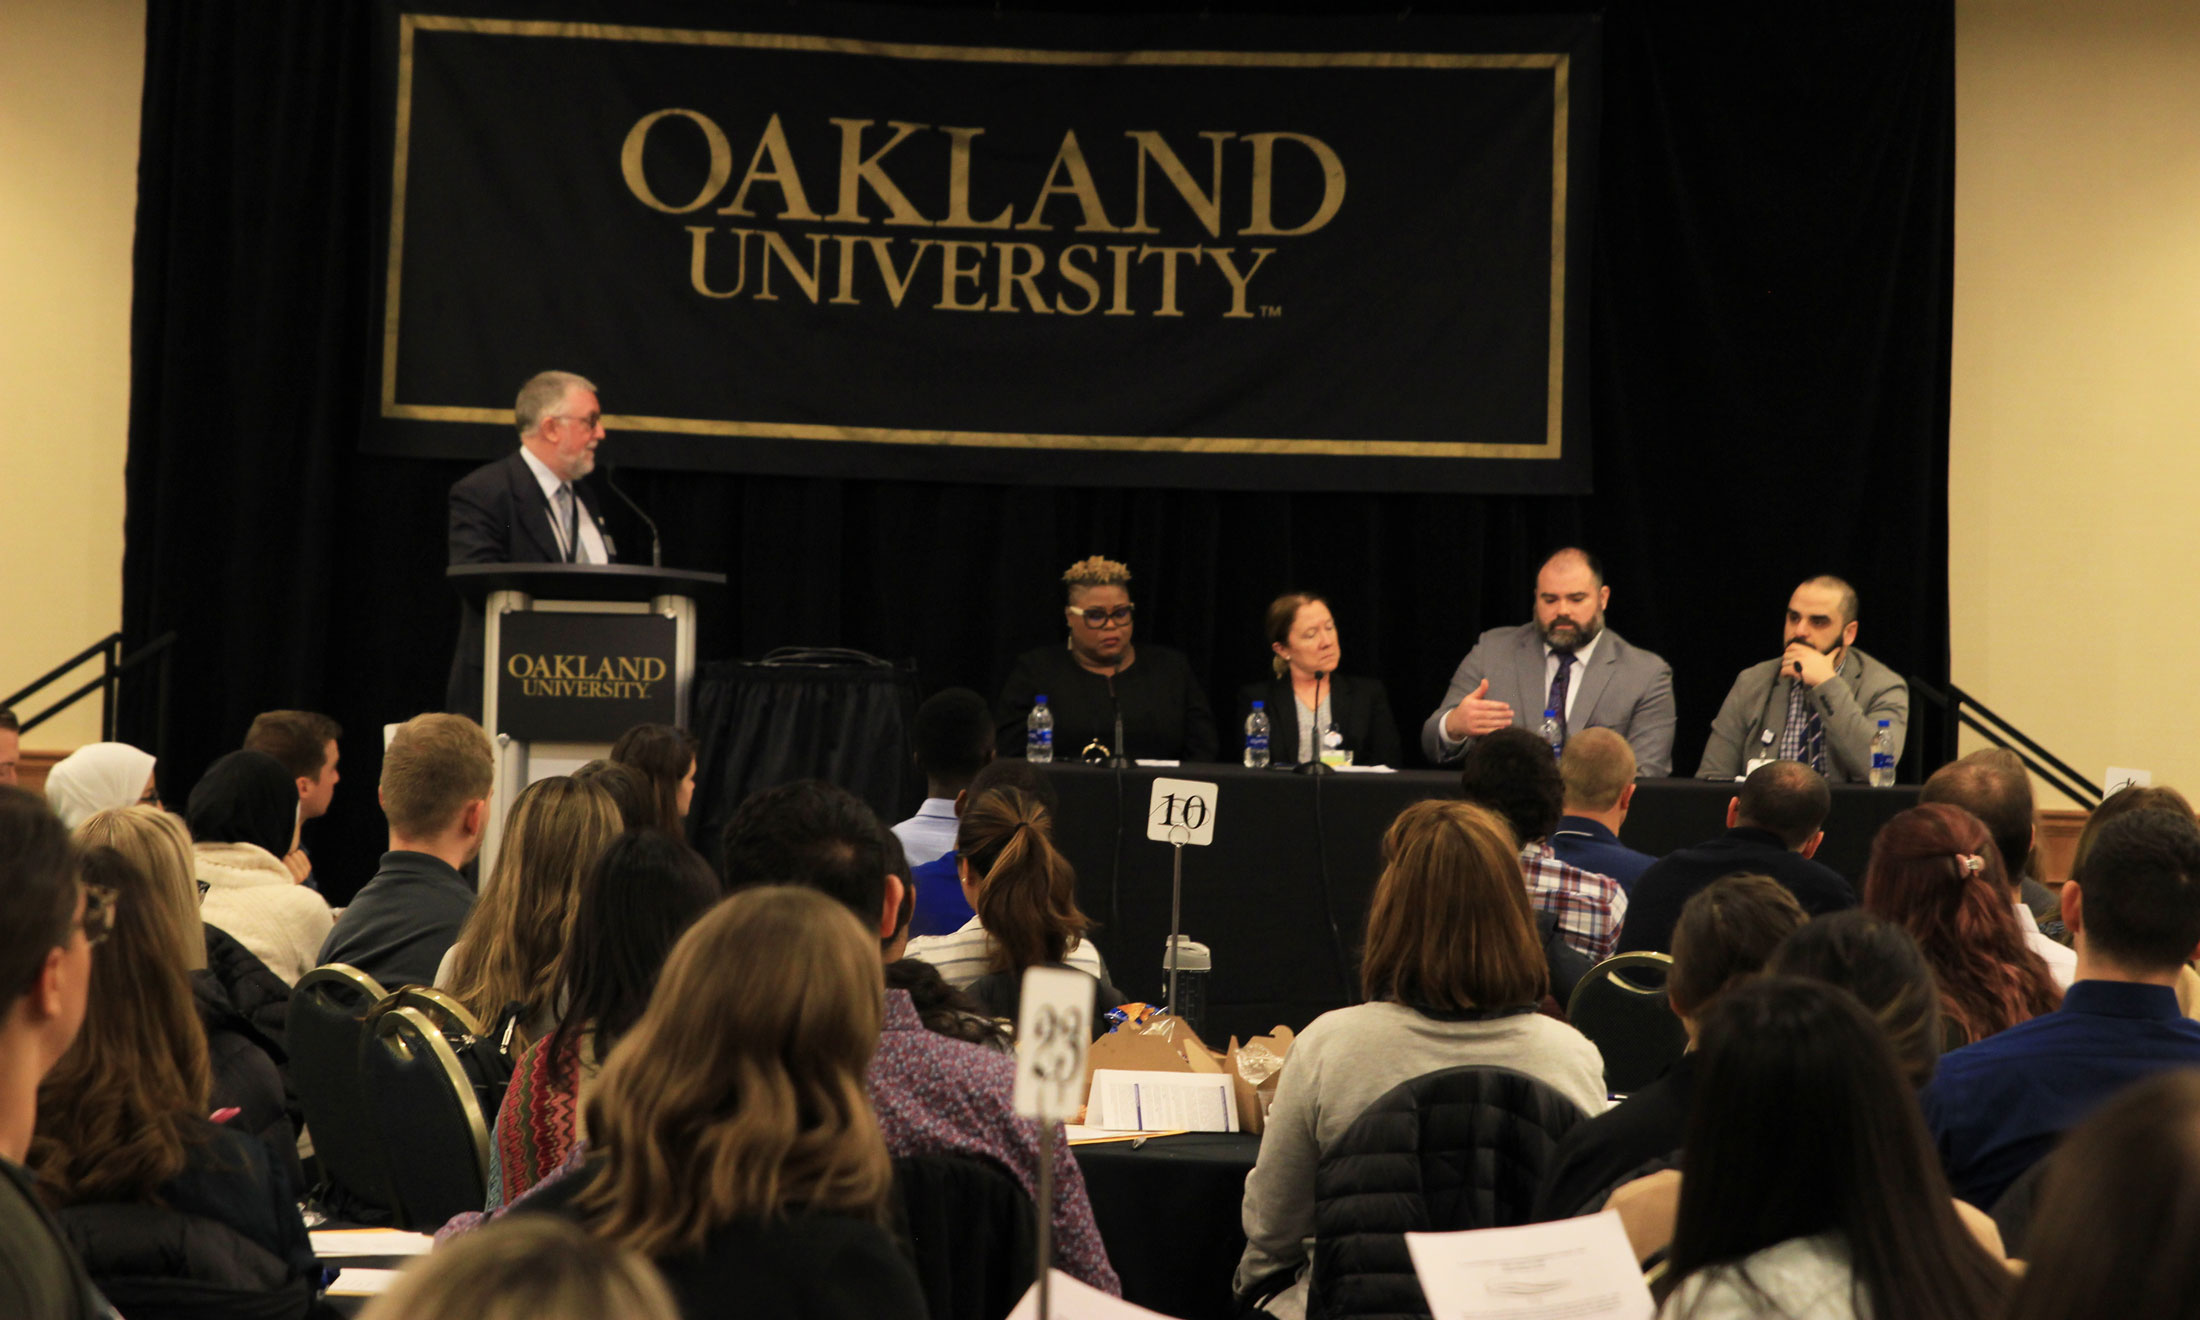 Interprofessional Workshop on Opioid Abuse Panel Discussion